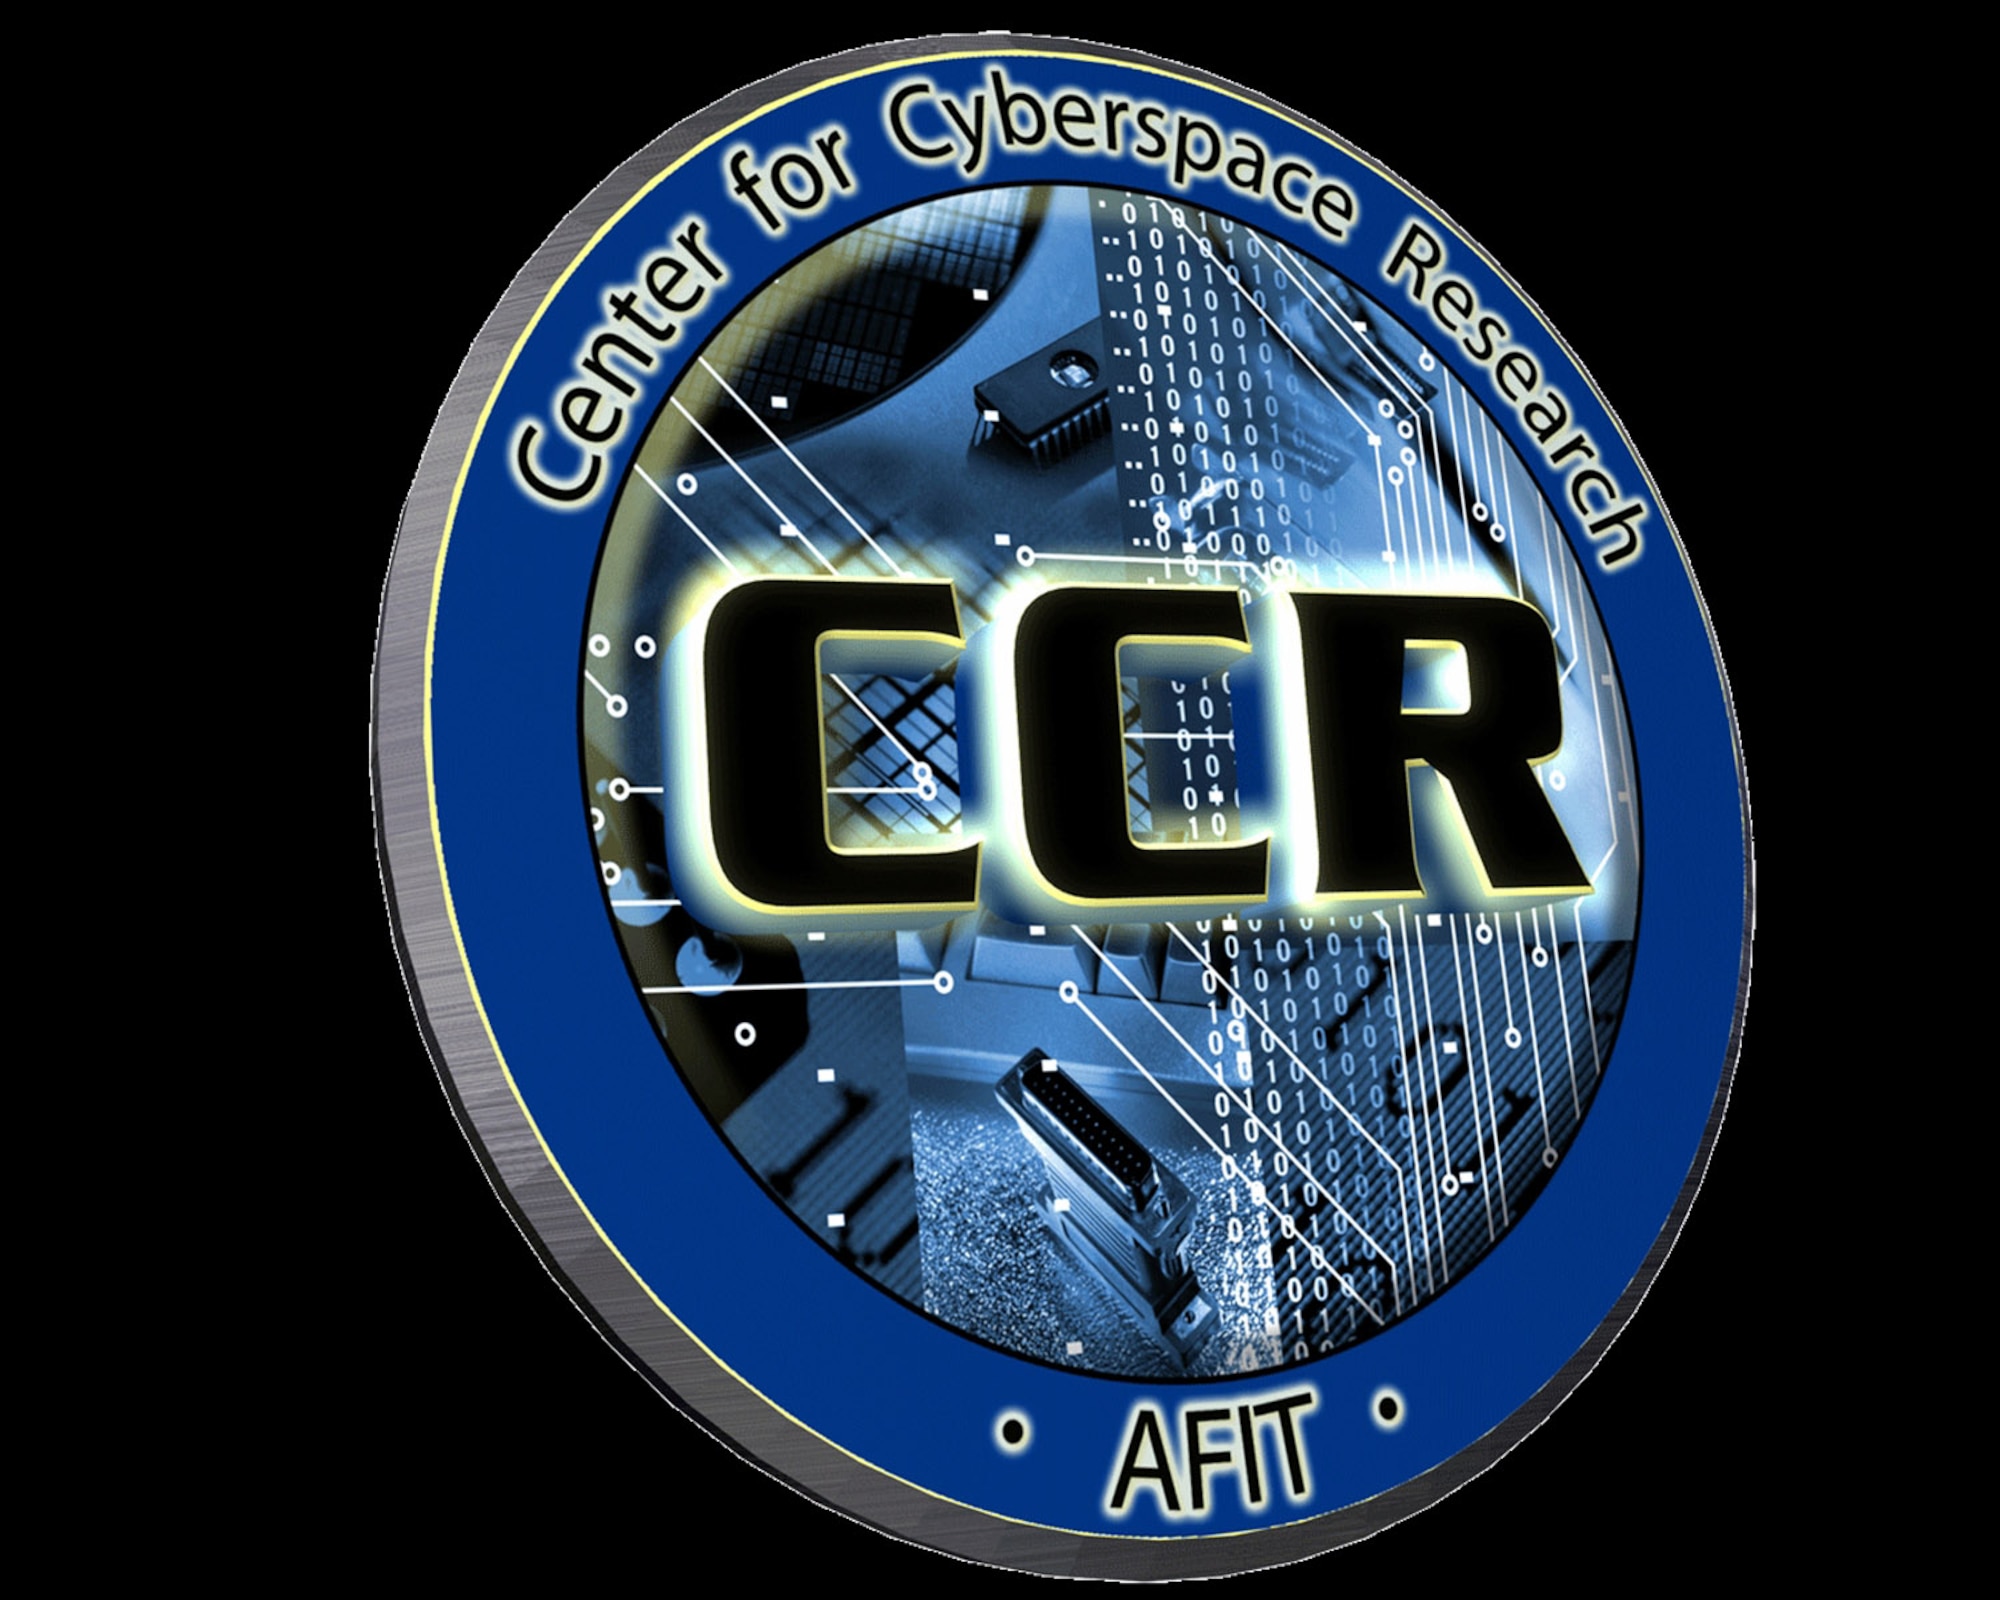 The Air Force Institute of Technology's Center for Cyberspace Research conducts defense-focused research at the Master's and PHD levels.  The center's faculty is helping to train and equip the warriors of the future for the cyber domain.  (U.S. Air Force graphic)